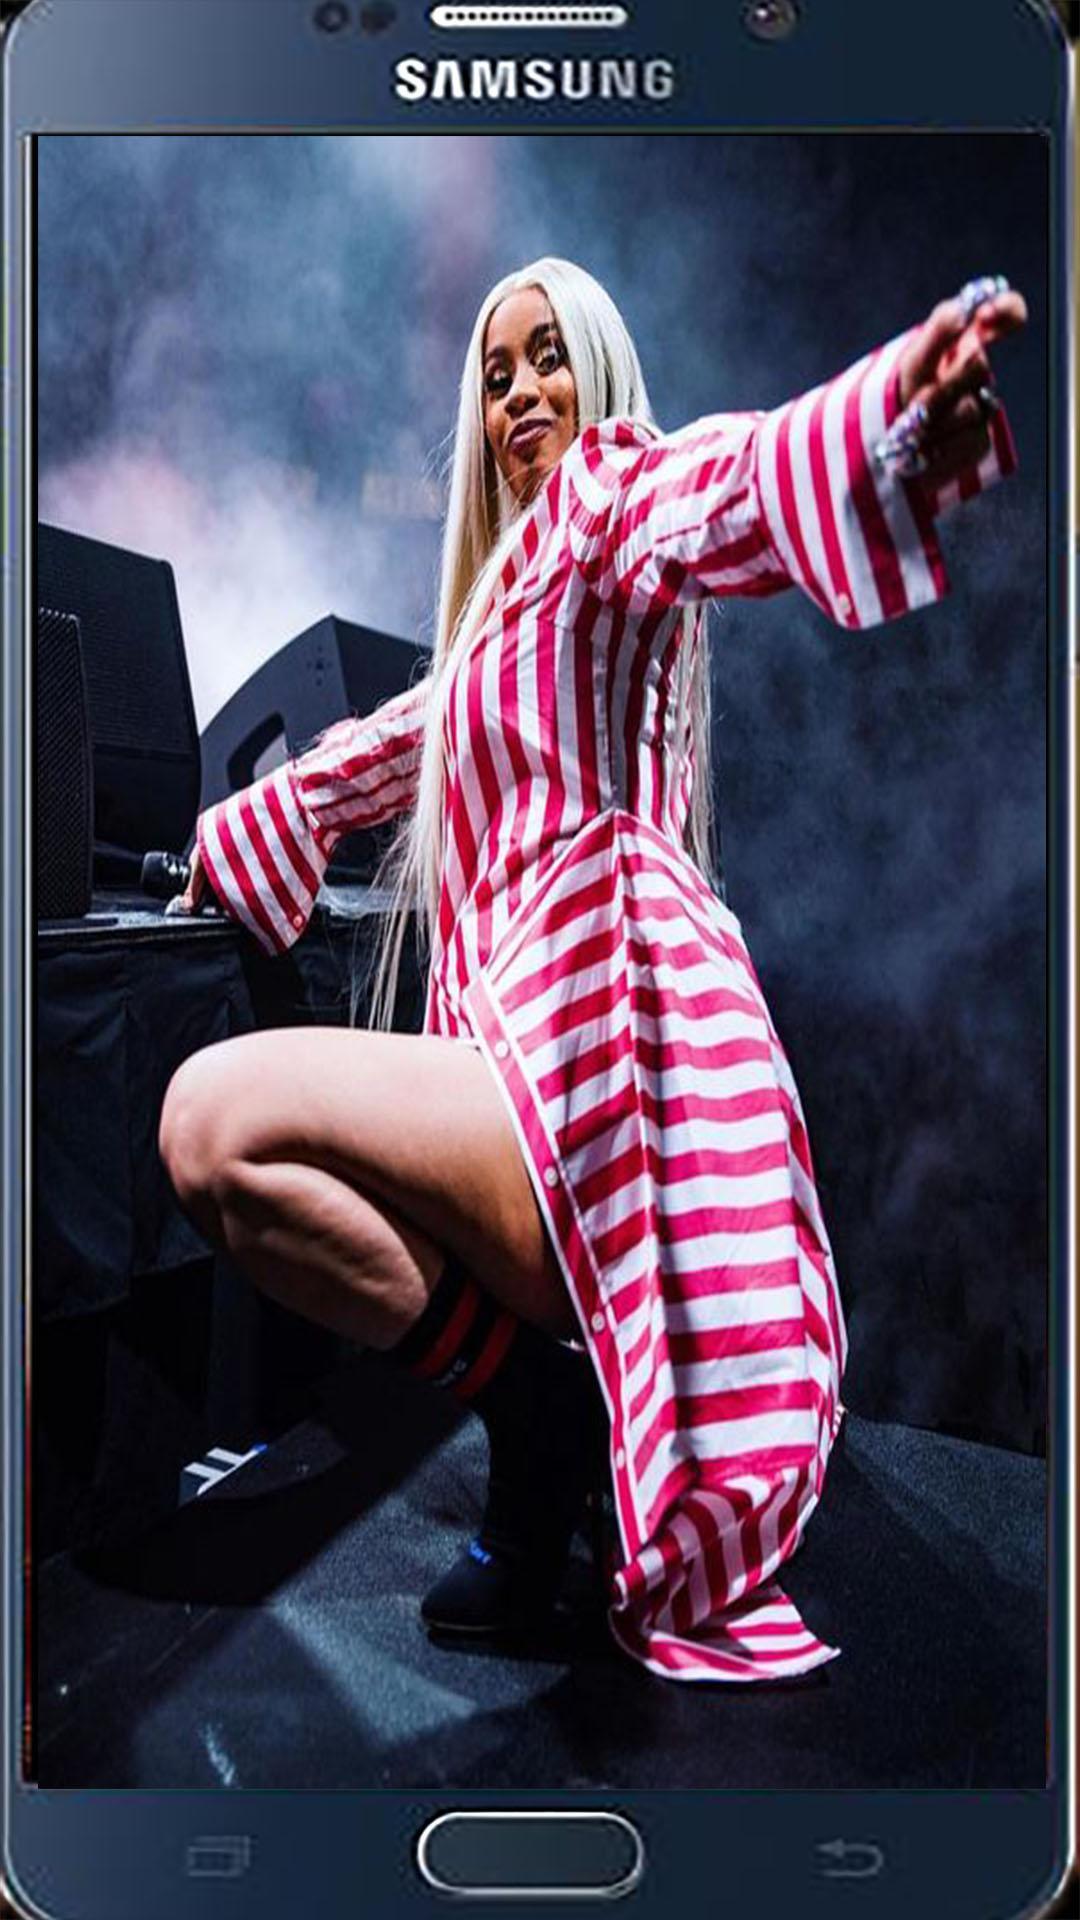 Cardi B Wallpaper 2019 Hd For Android Apk Download